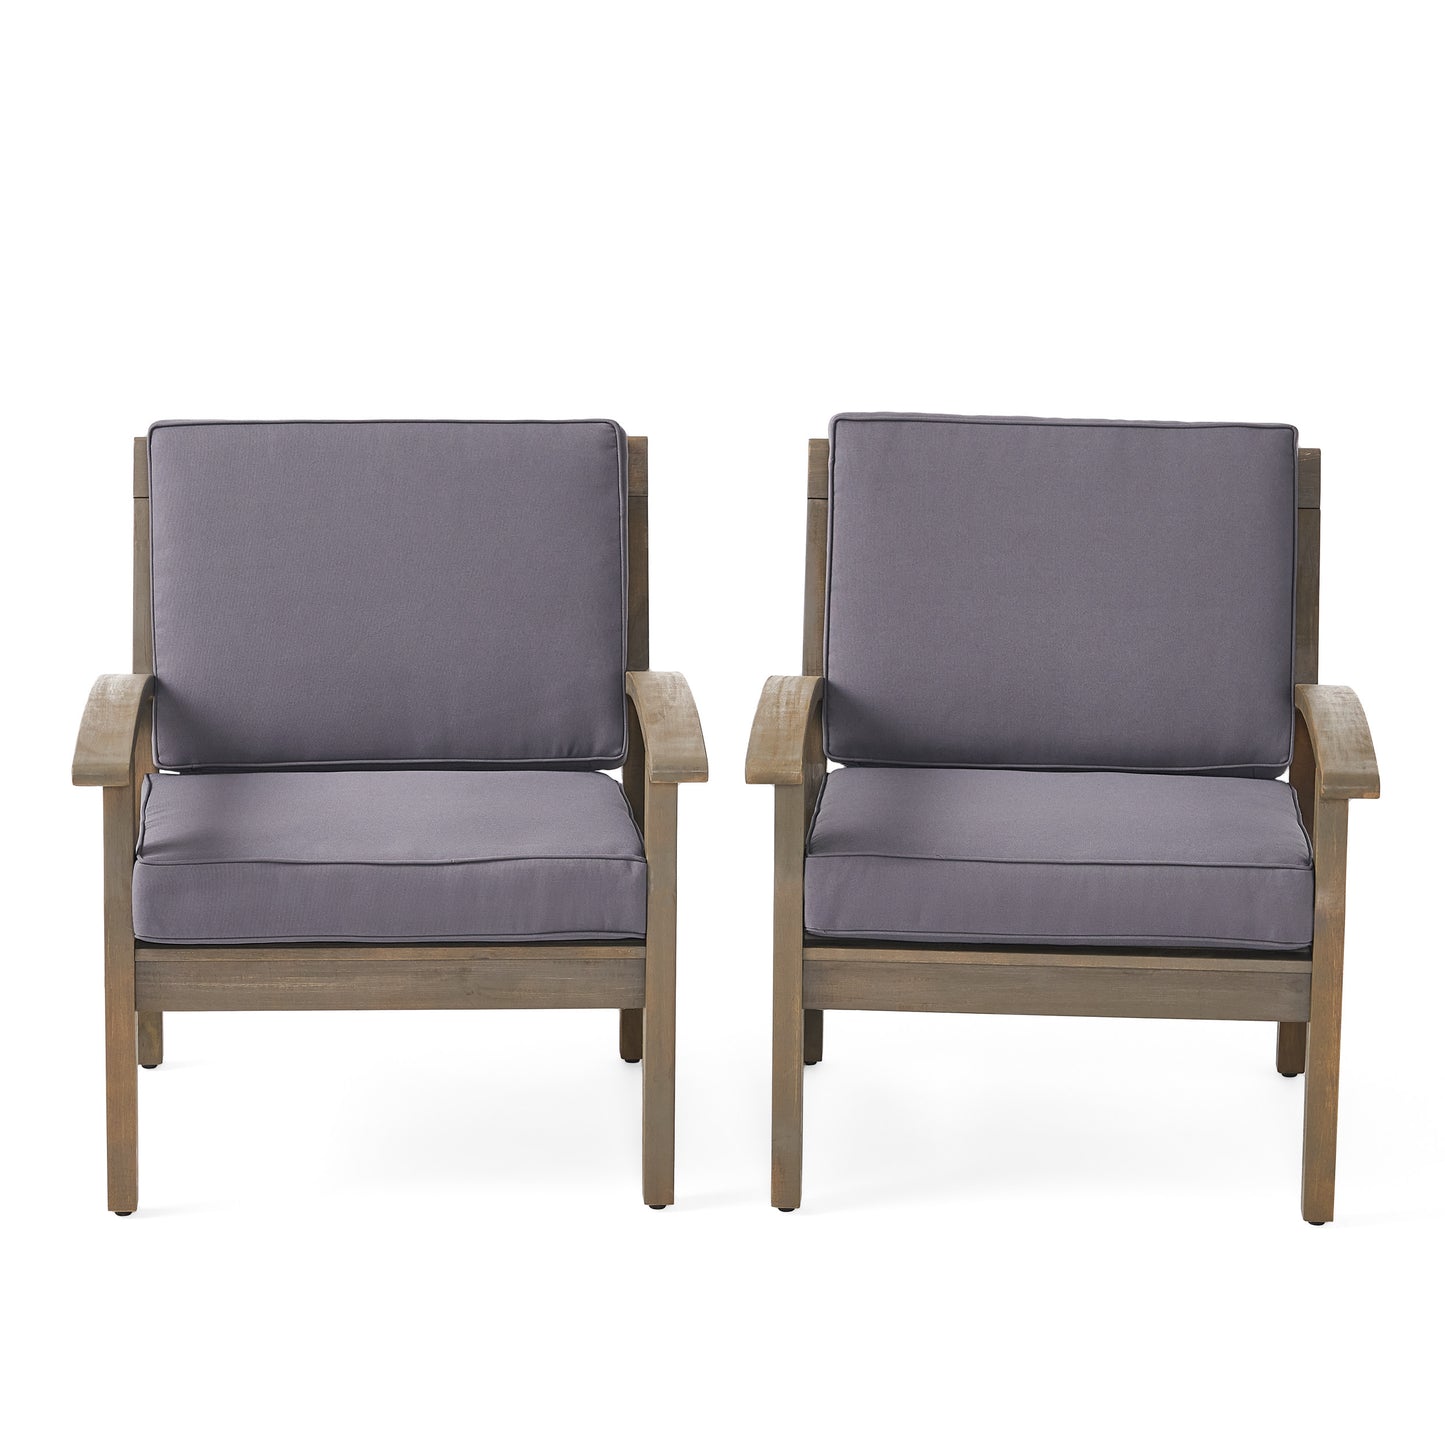 Keanu Outdoor Wooden Club Chairs (Set of 2)